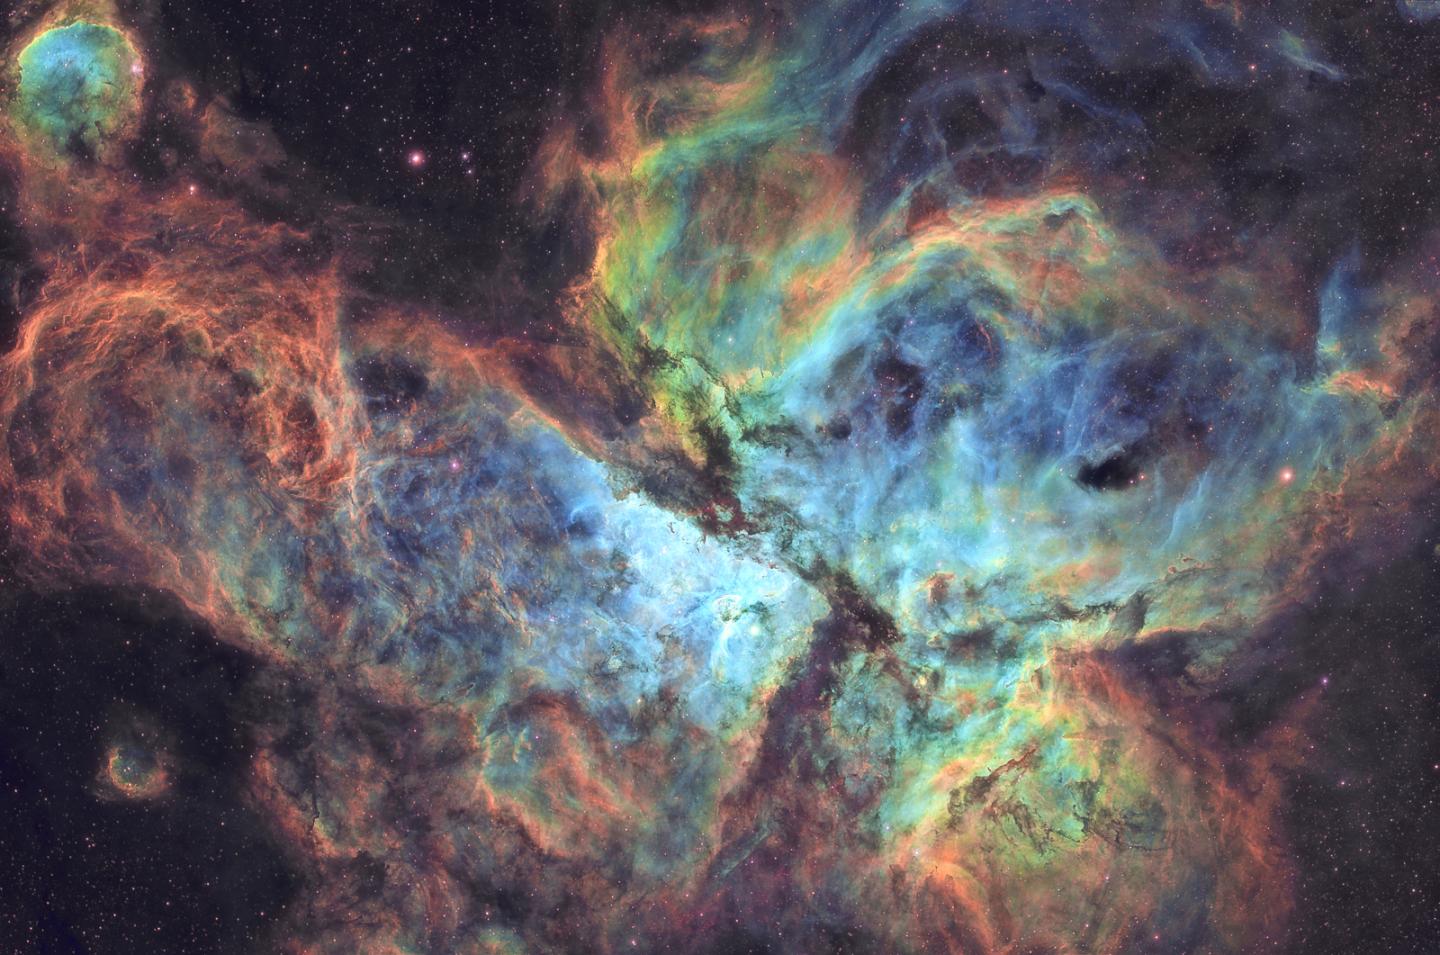 Deep space image showing the Carina Nebula, appearing as a swirl of pale blue and yellow mist against a dark sky